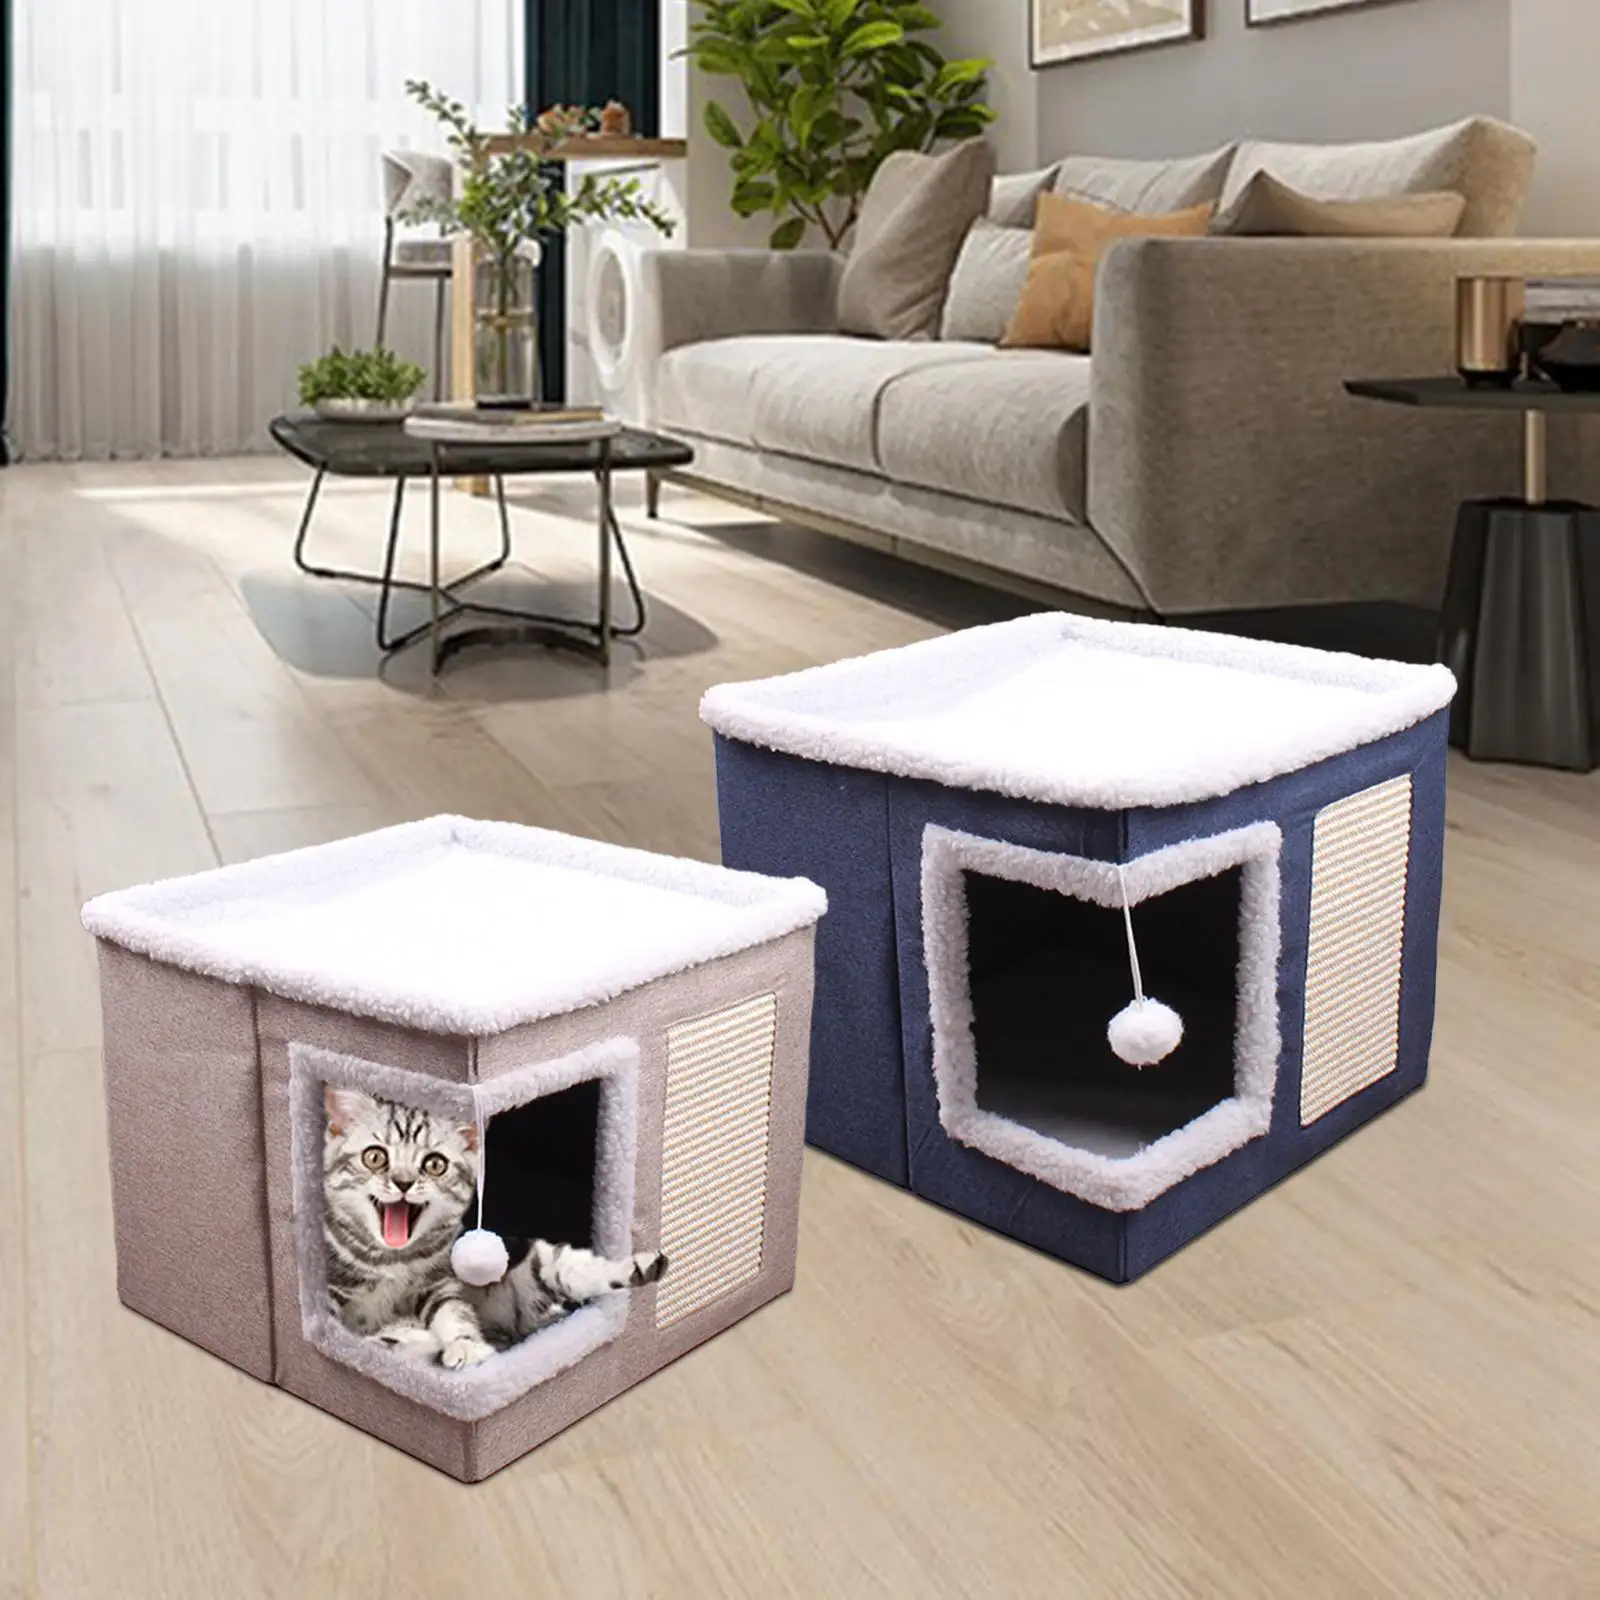 Cat Hideaway and Scratch Pad Cat House Foldable Kitty Cave Bed Large Kitty Cave for Small Animals Indoor Kittens Kitty Cats